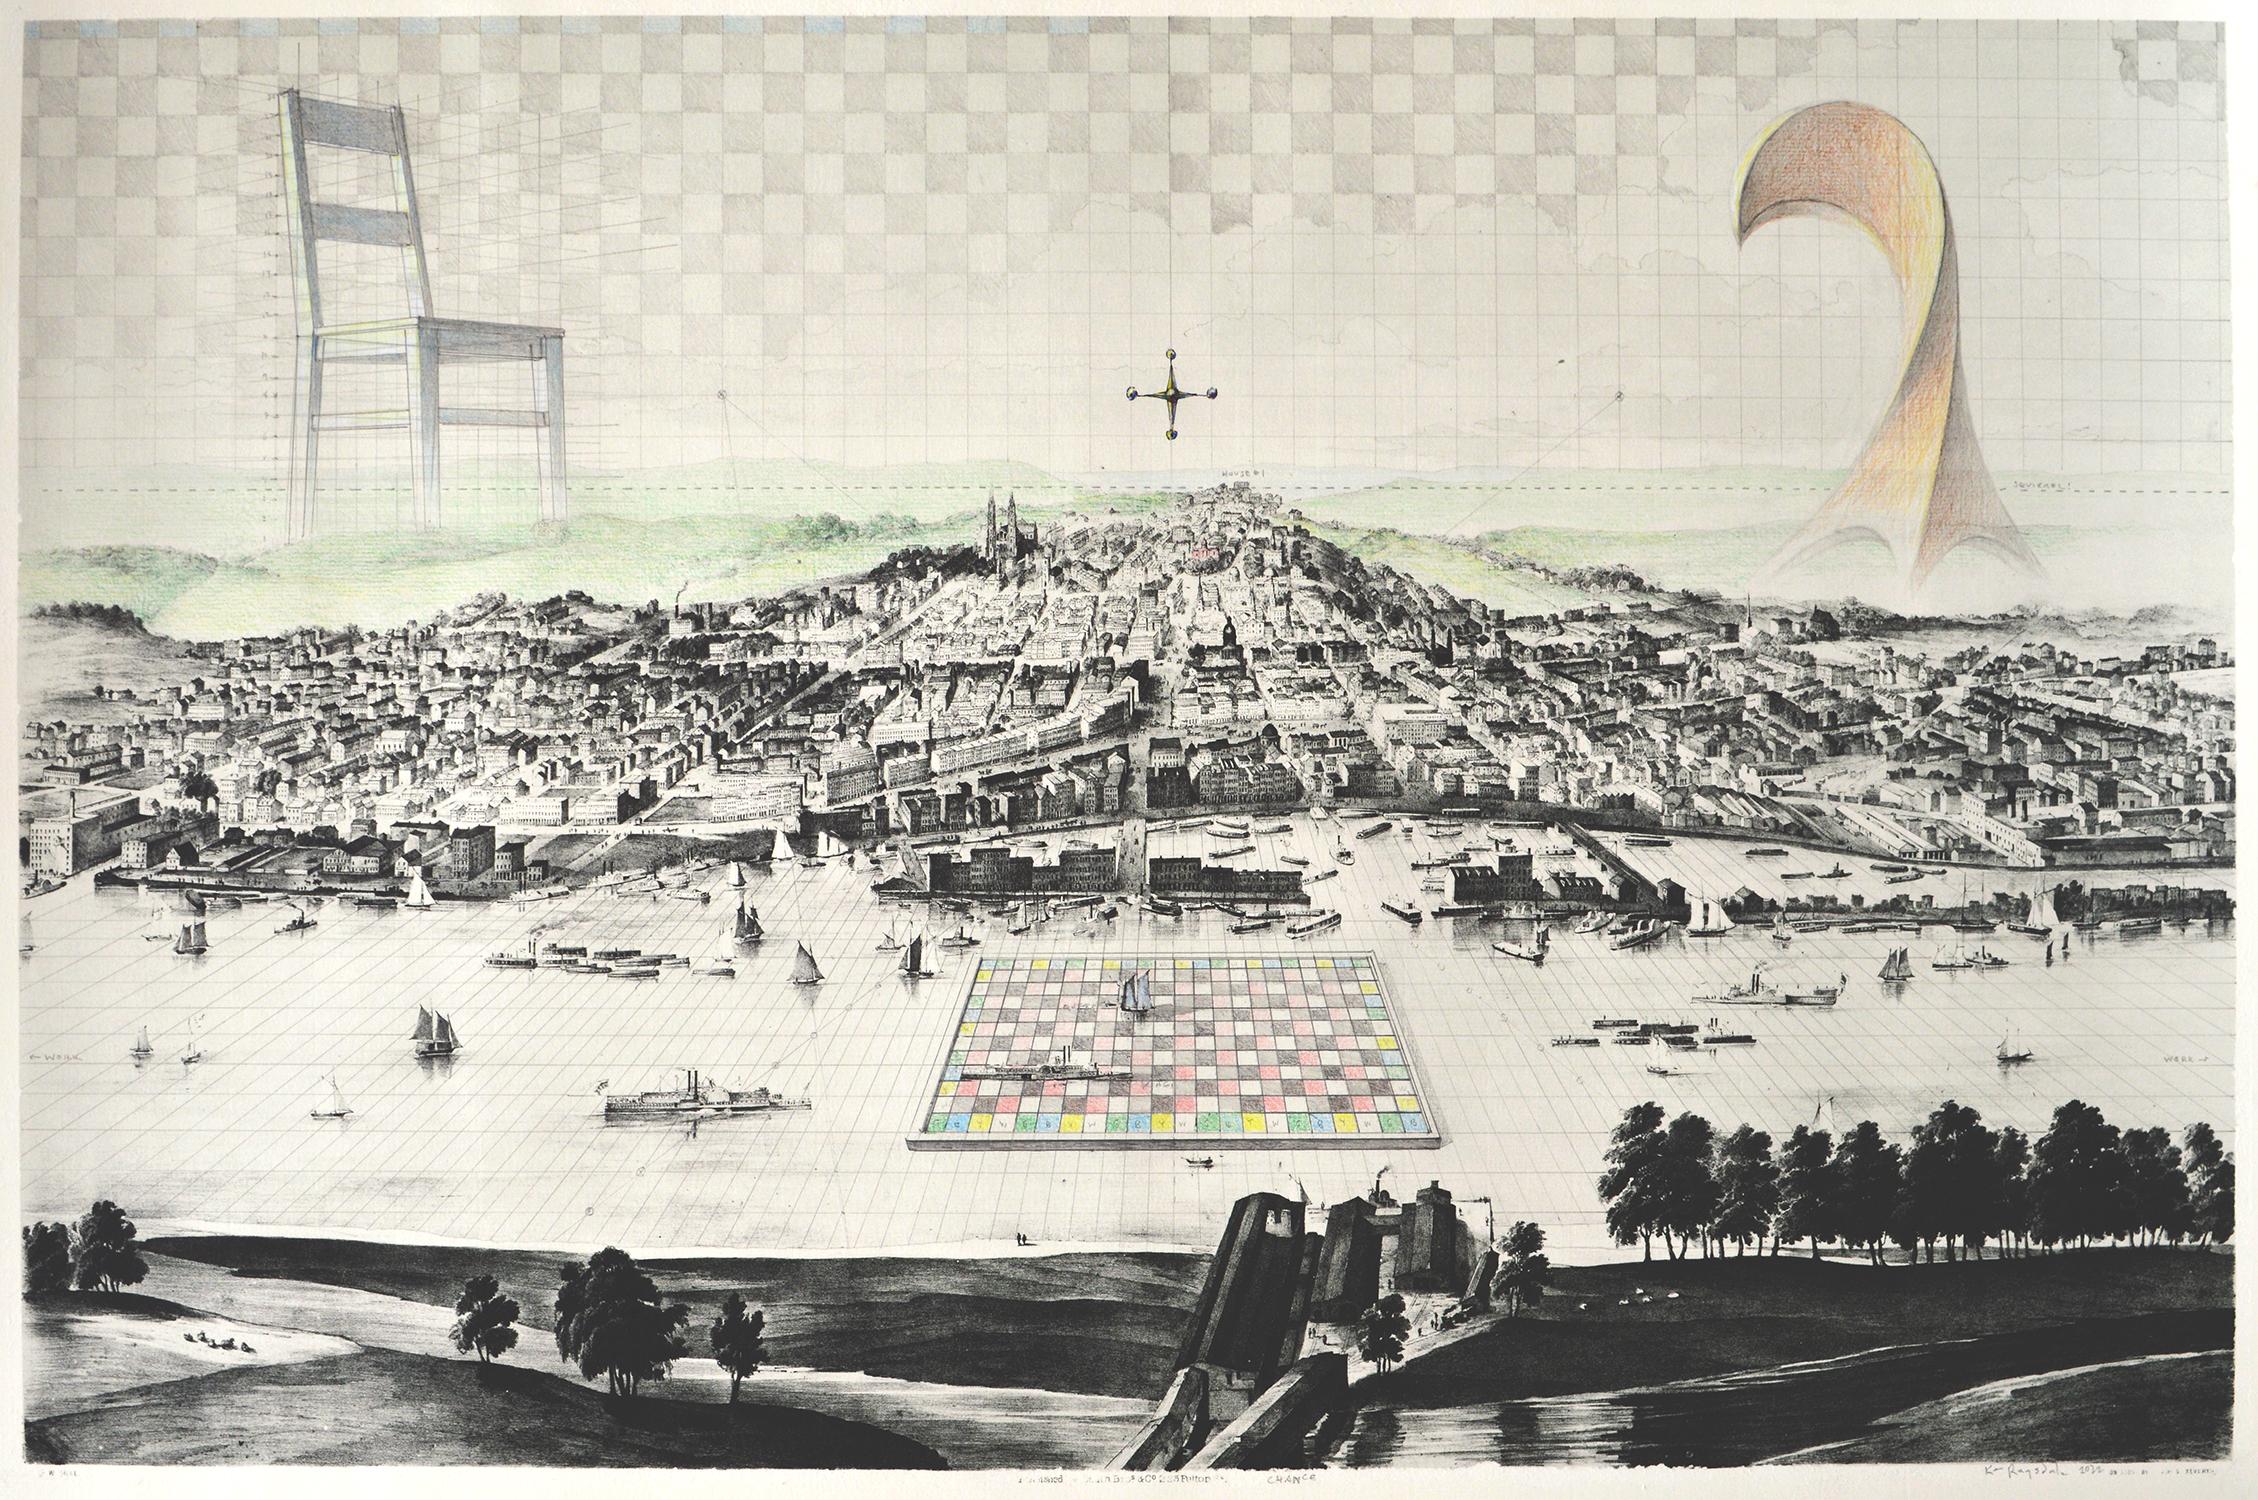 Ken Ragsdale Landscape Art - "Chance" Contemporary Surrealist Perspectival Map Drawing of Albany, New York